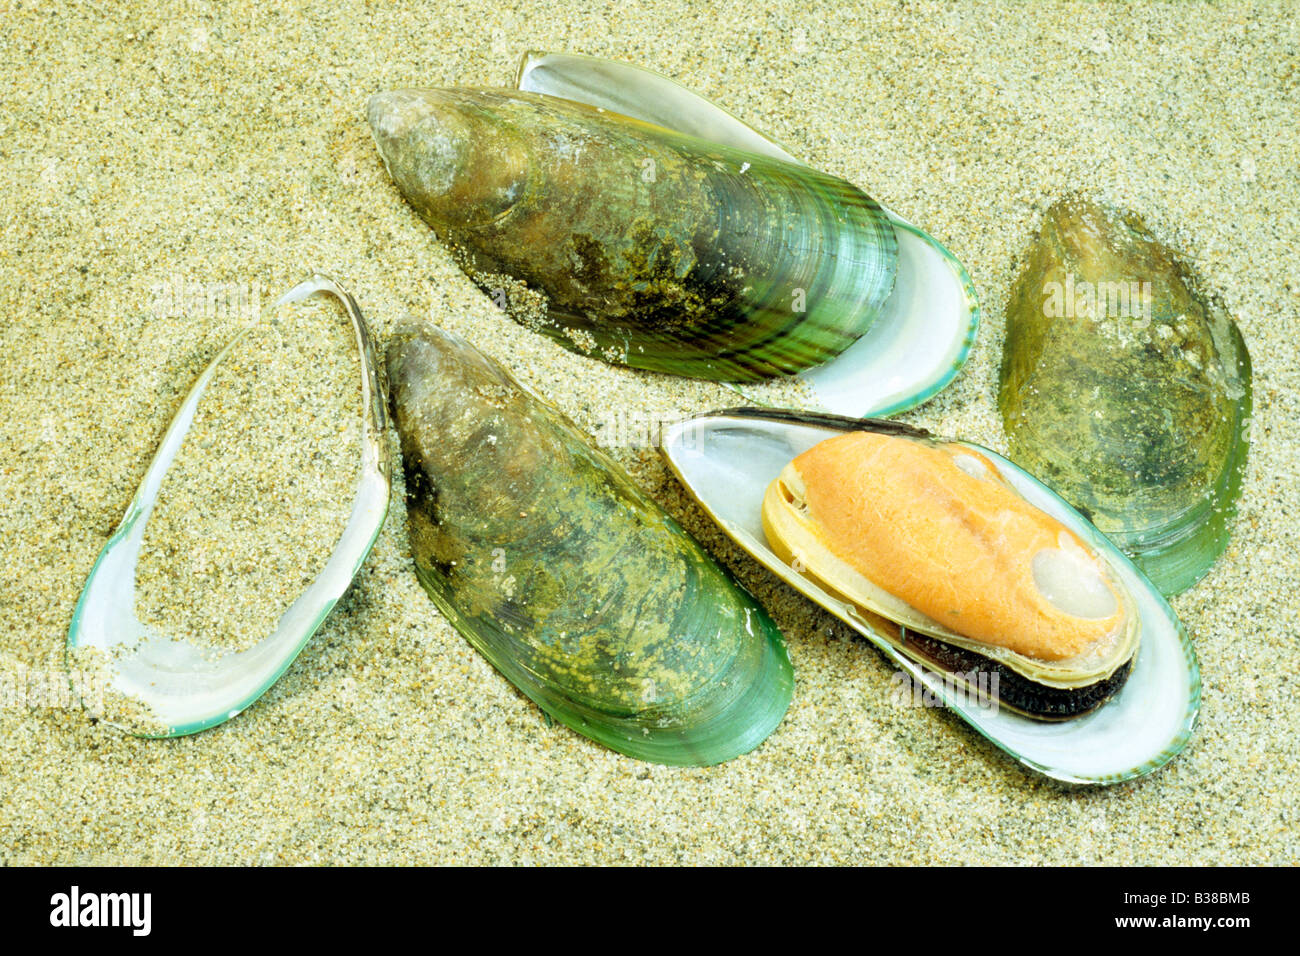 Greenshell Mussel, New Zealand Mussel, Channel Mussel (Perna canaliculus), on sand Stock Photo